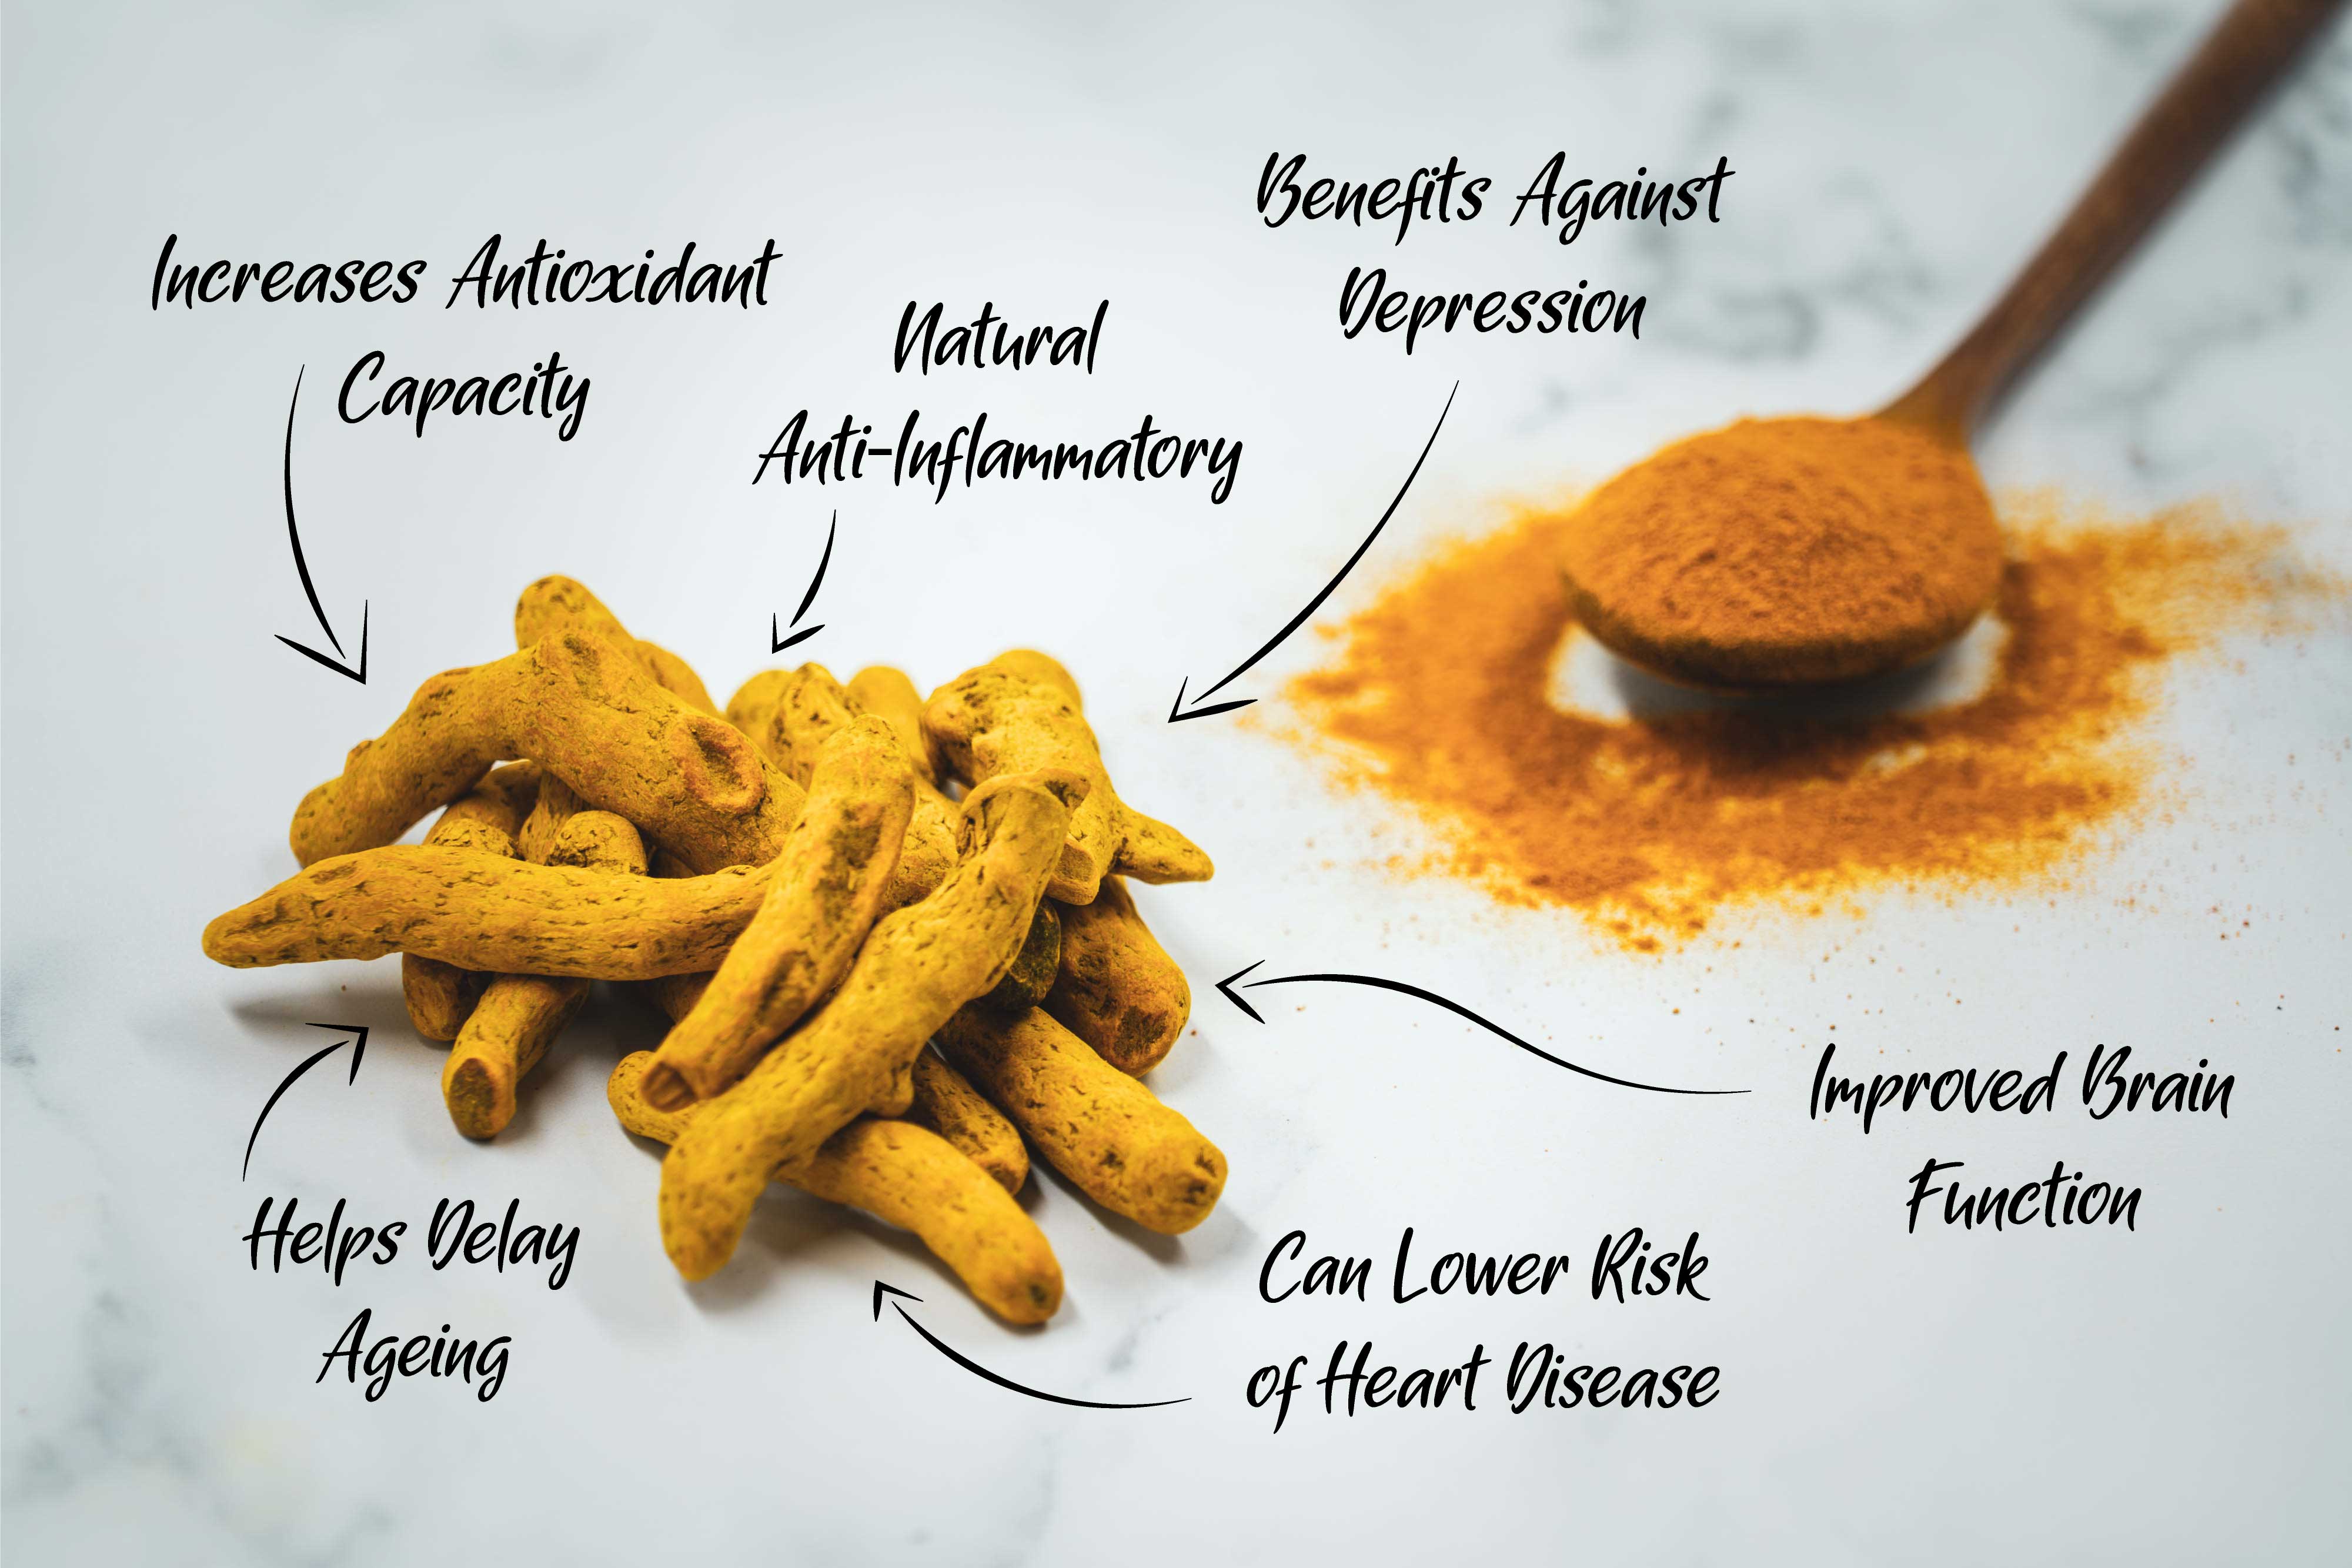 A Natural Anti-inflammatory Agent: Curcumin's Role in Managing Inflammation